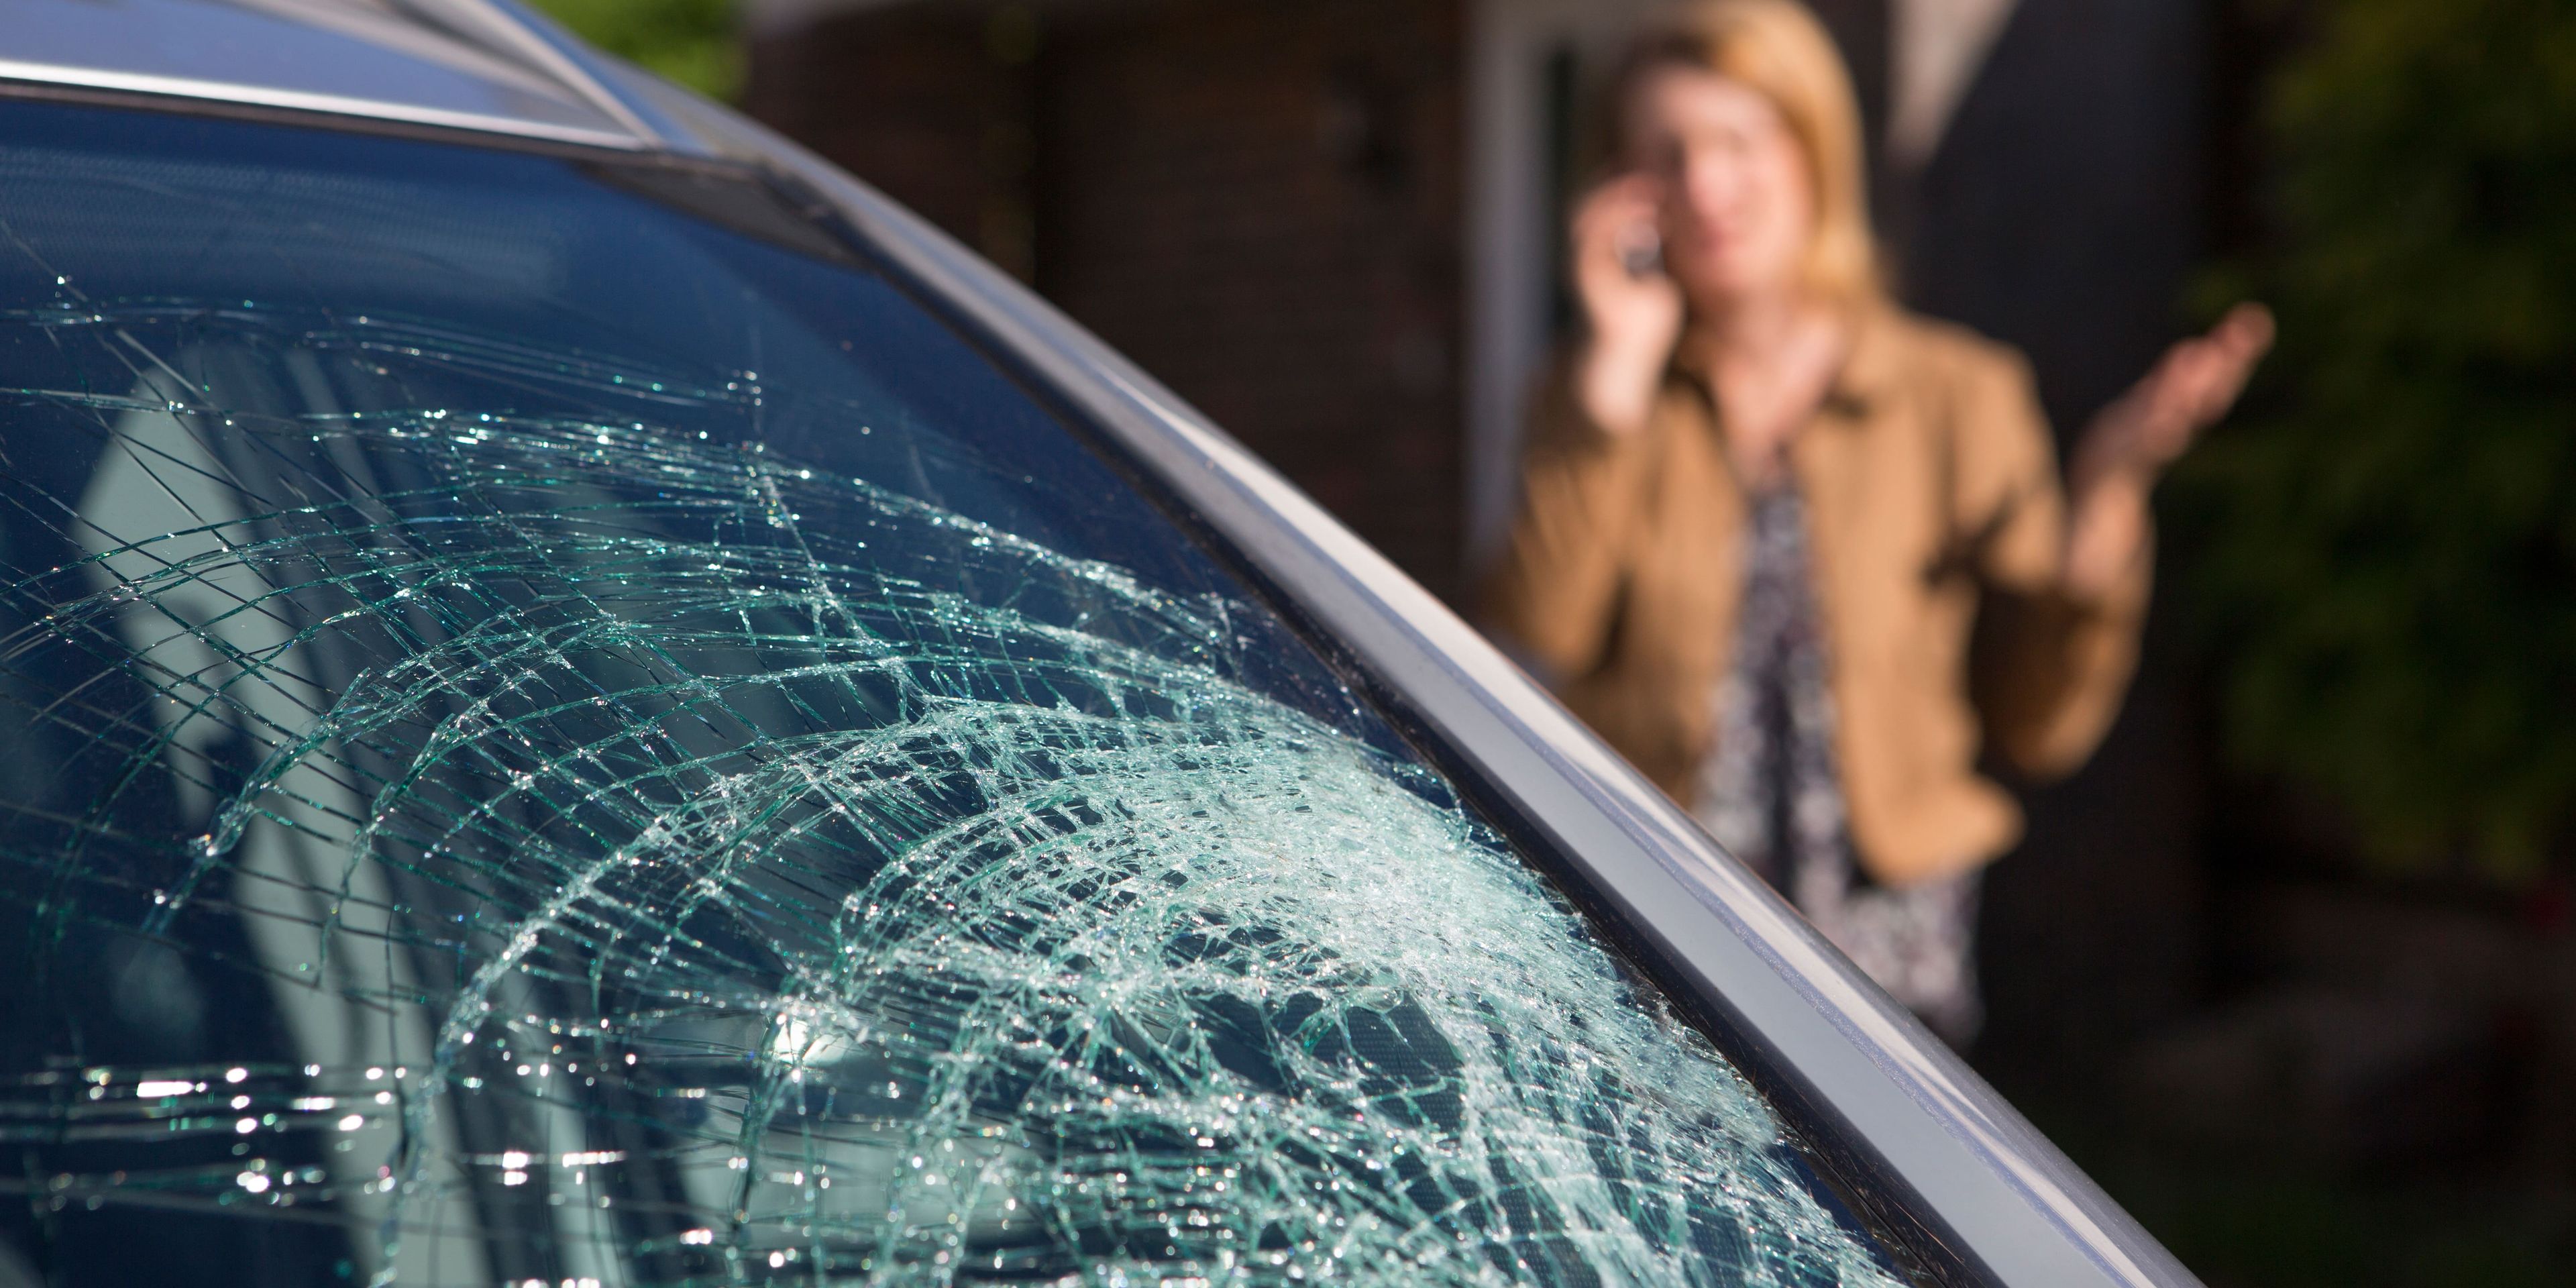 woman-phoning-help-after-car-windshield